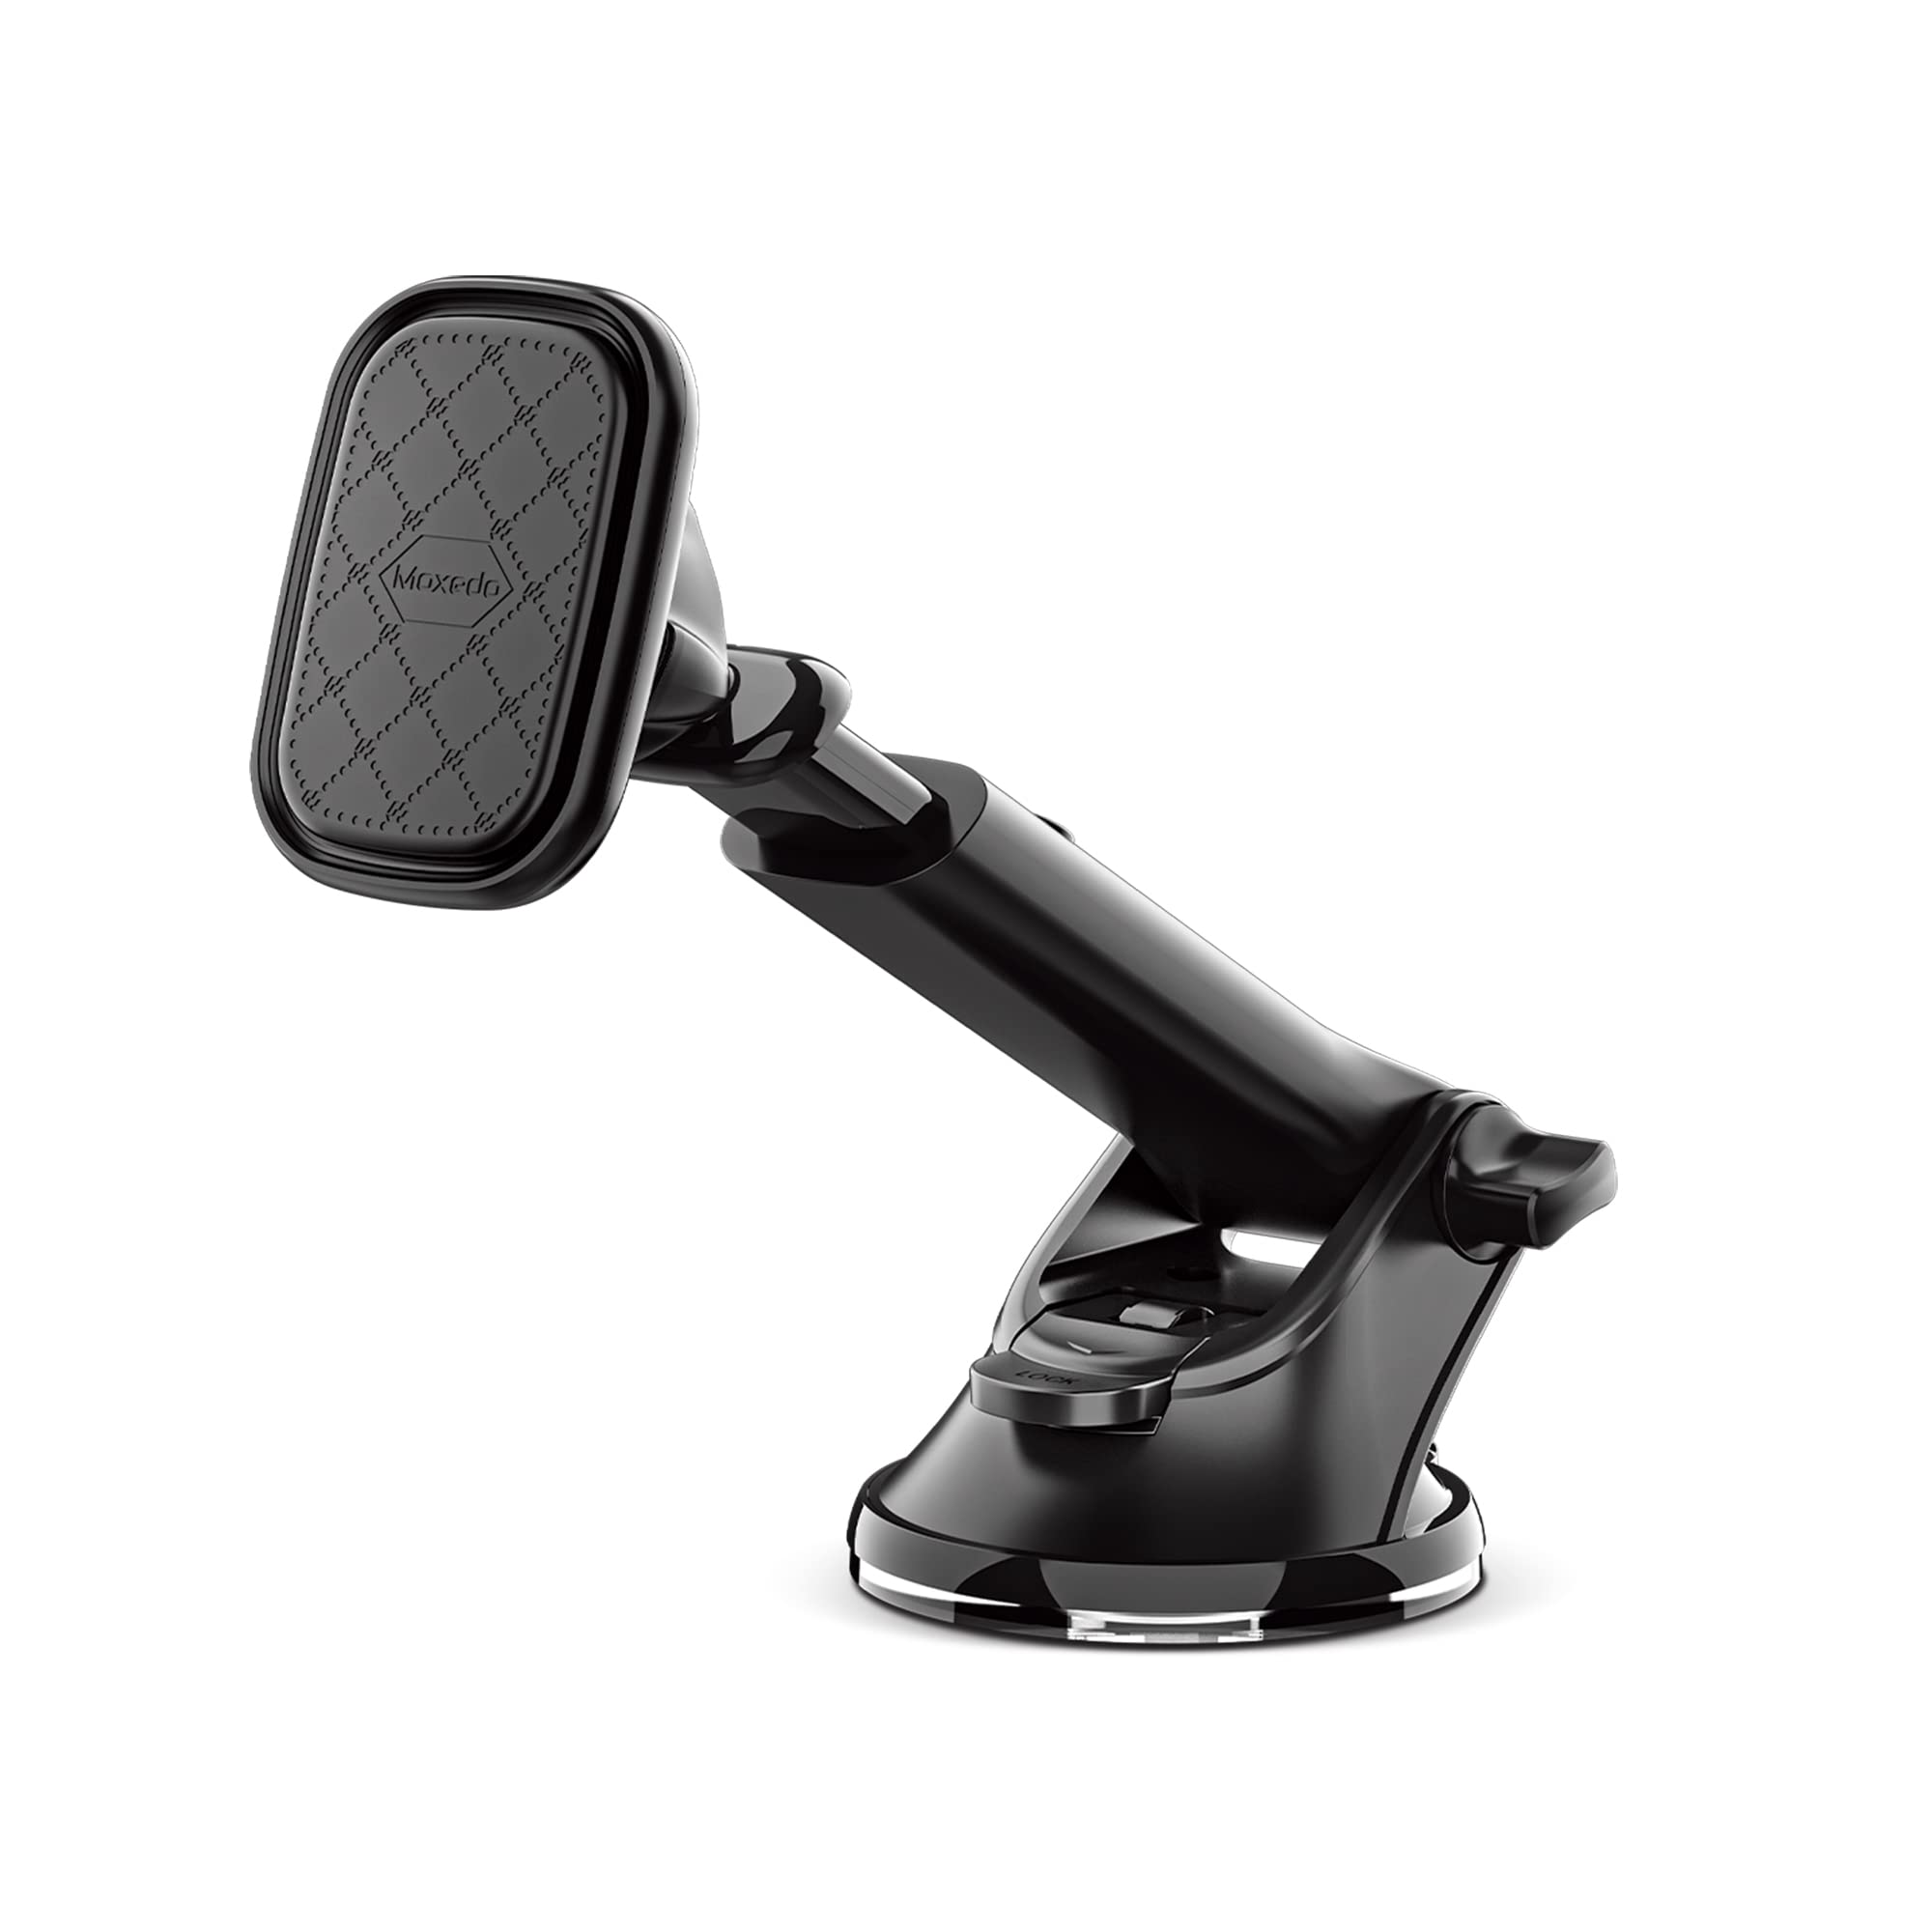 Moxedo Magnetic Car Mount Phone Holder Hands Free Windshield, Dashboard, Adjustable Telescopic Arm